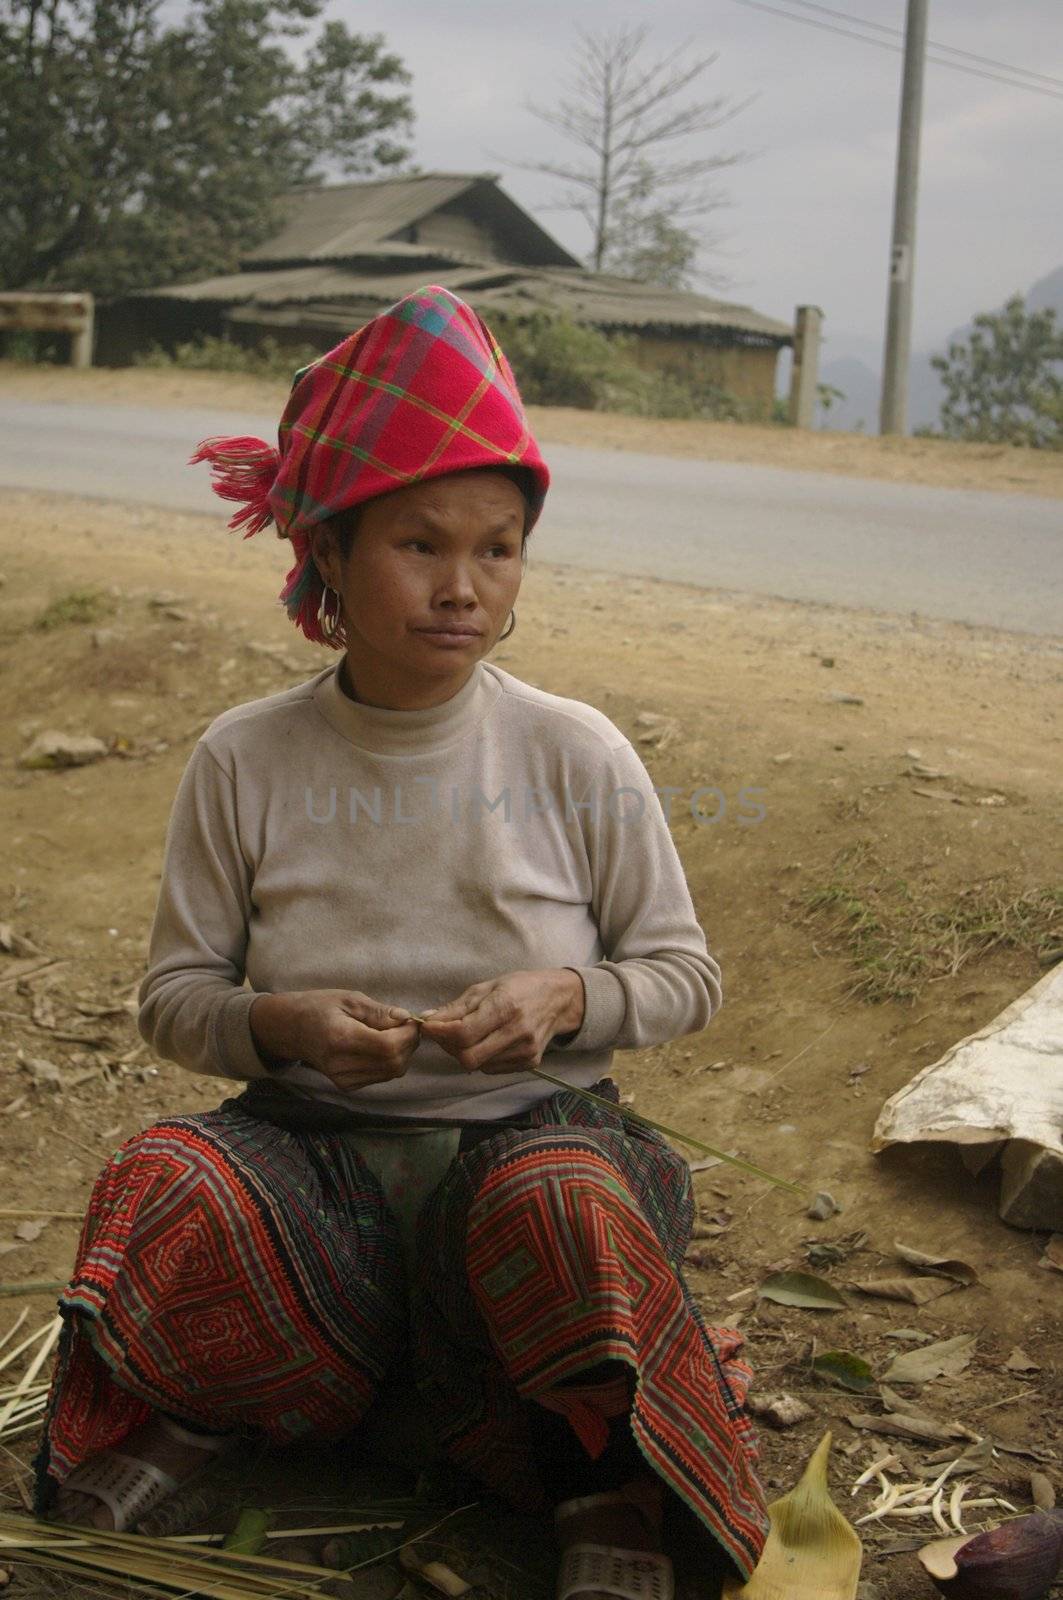 This woman from flowered Hmong  ethnic group of northern Vietnam is sitting at the roadside to make links to attach the flowers she sells banana